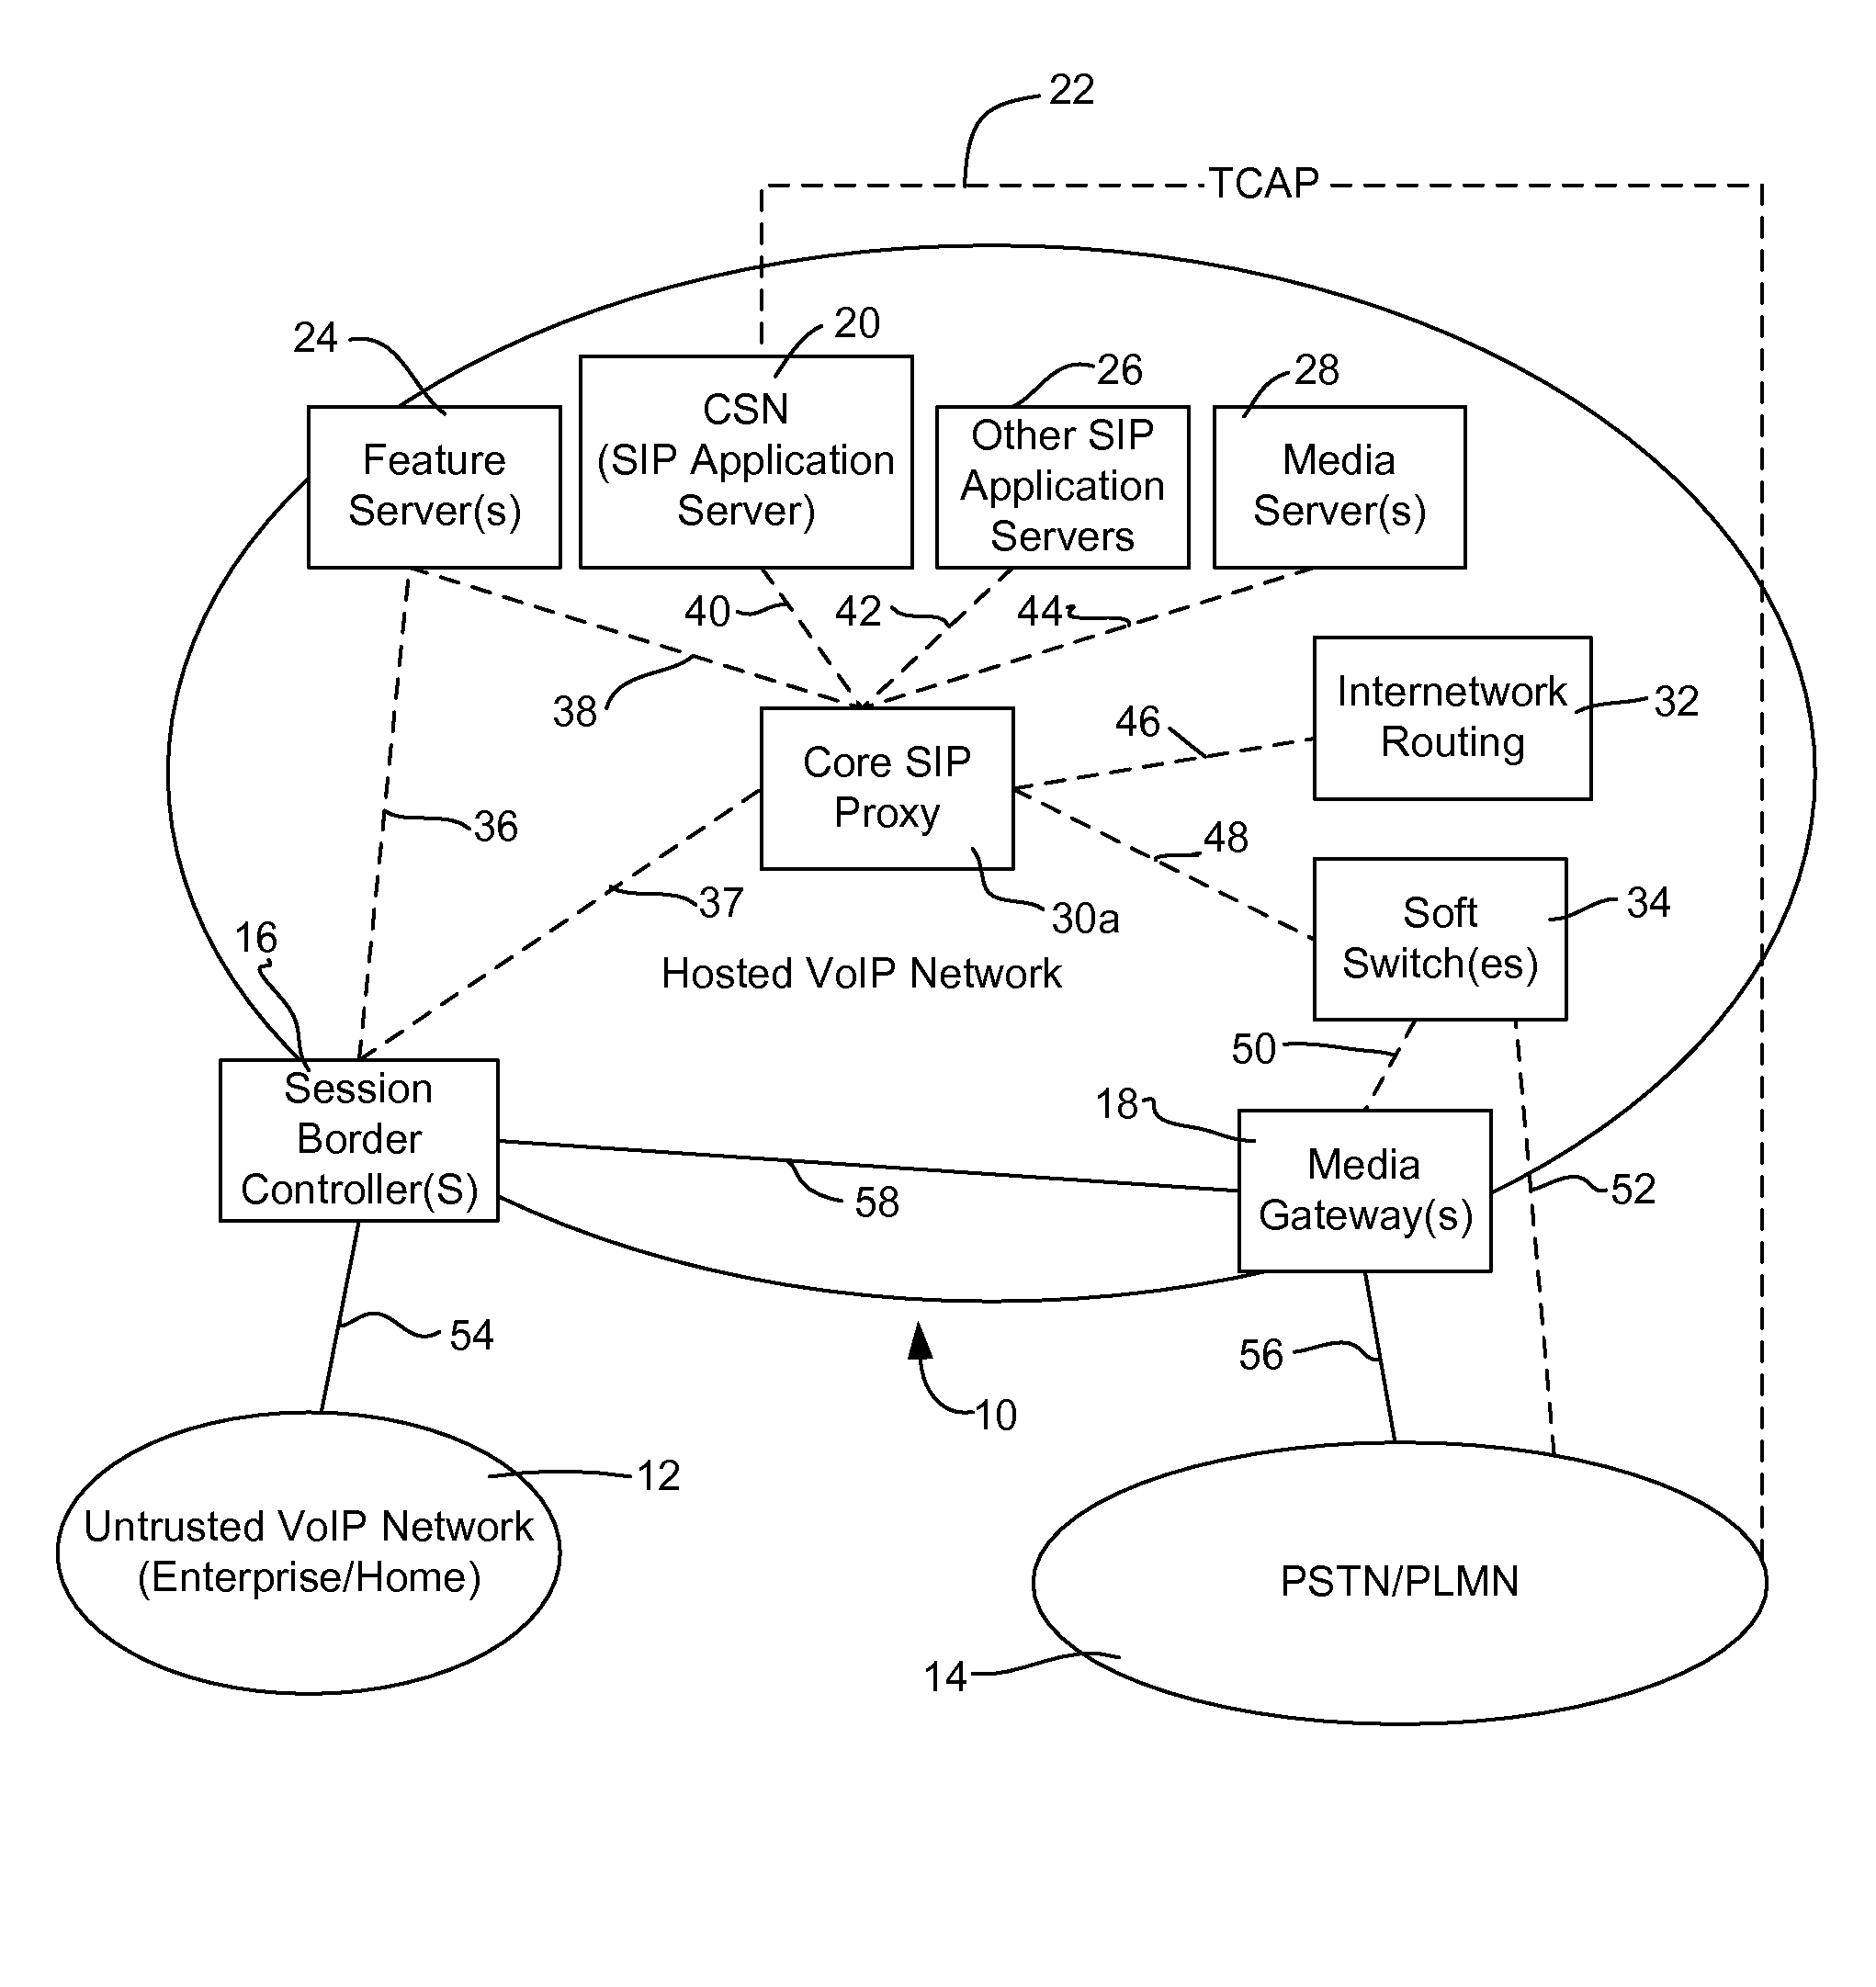 Method and System for Directed Call Establishment to Facilitate the Provision of Enhanced Communications Services